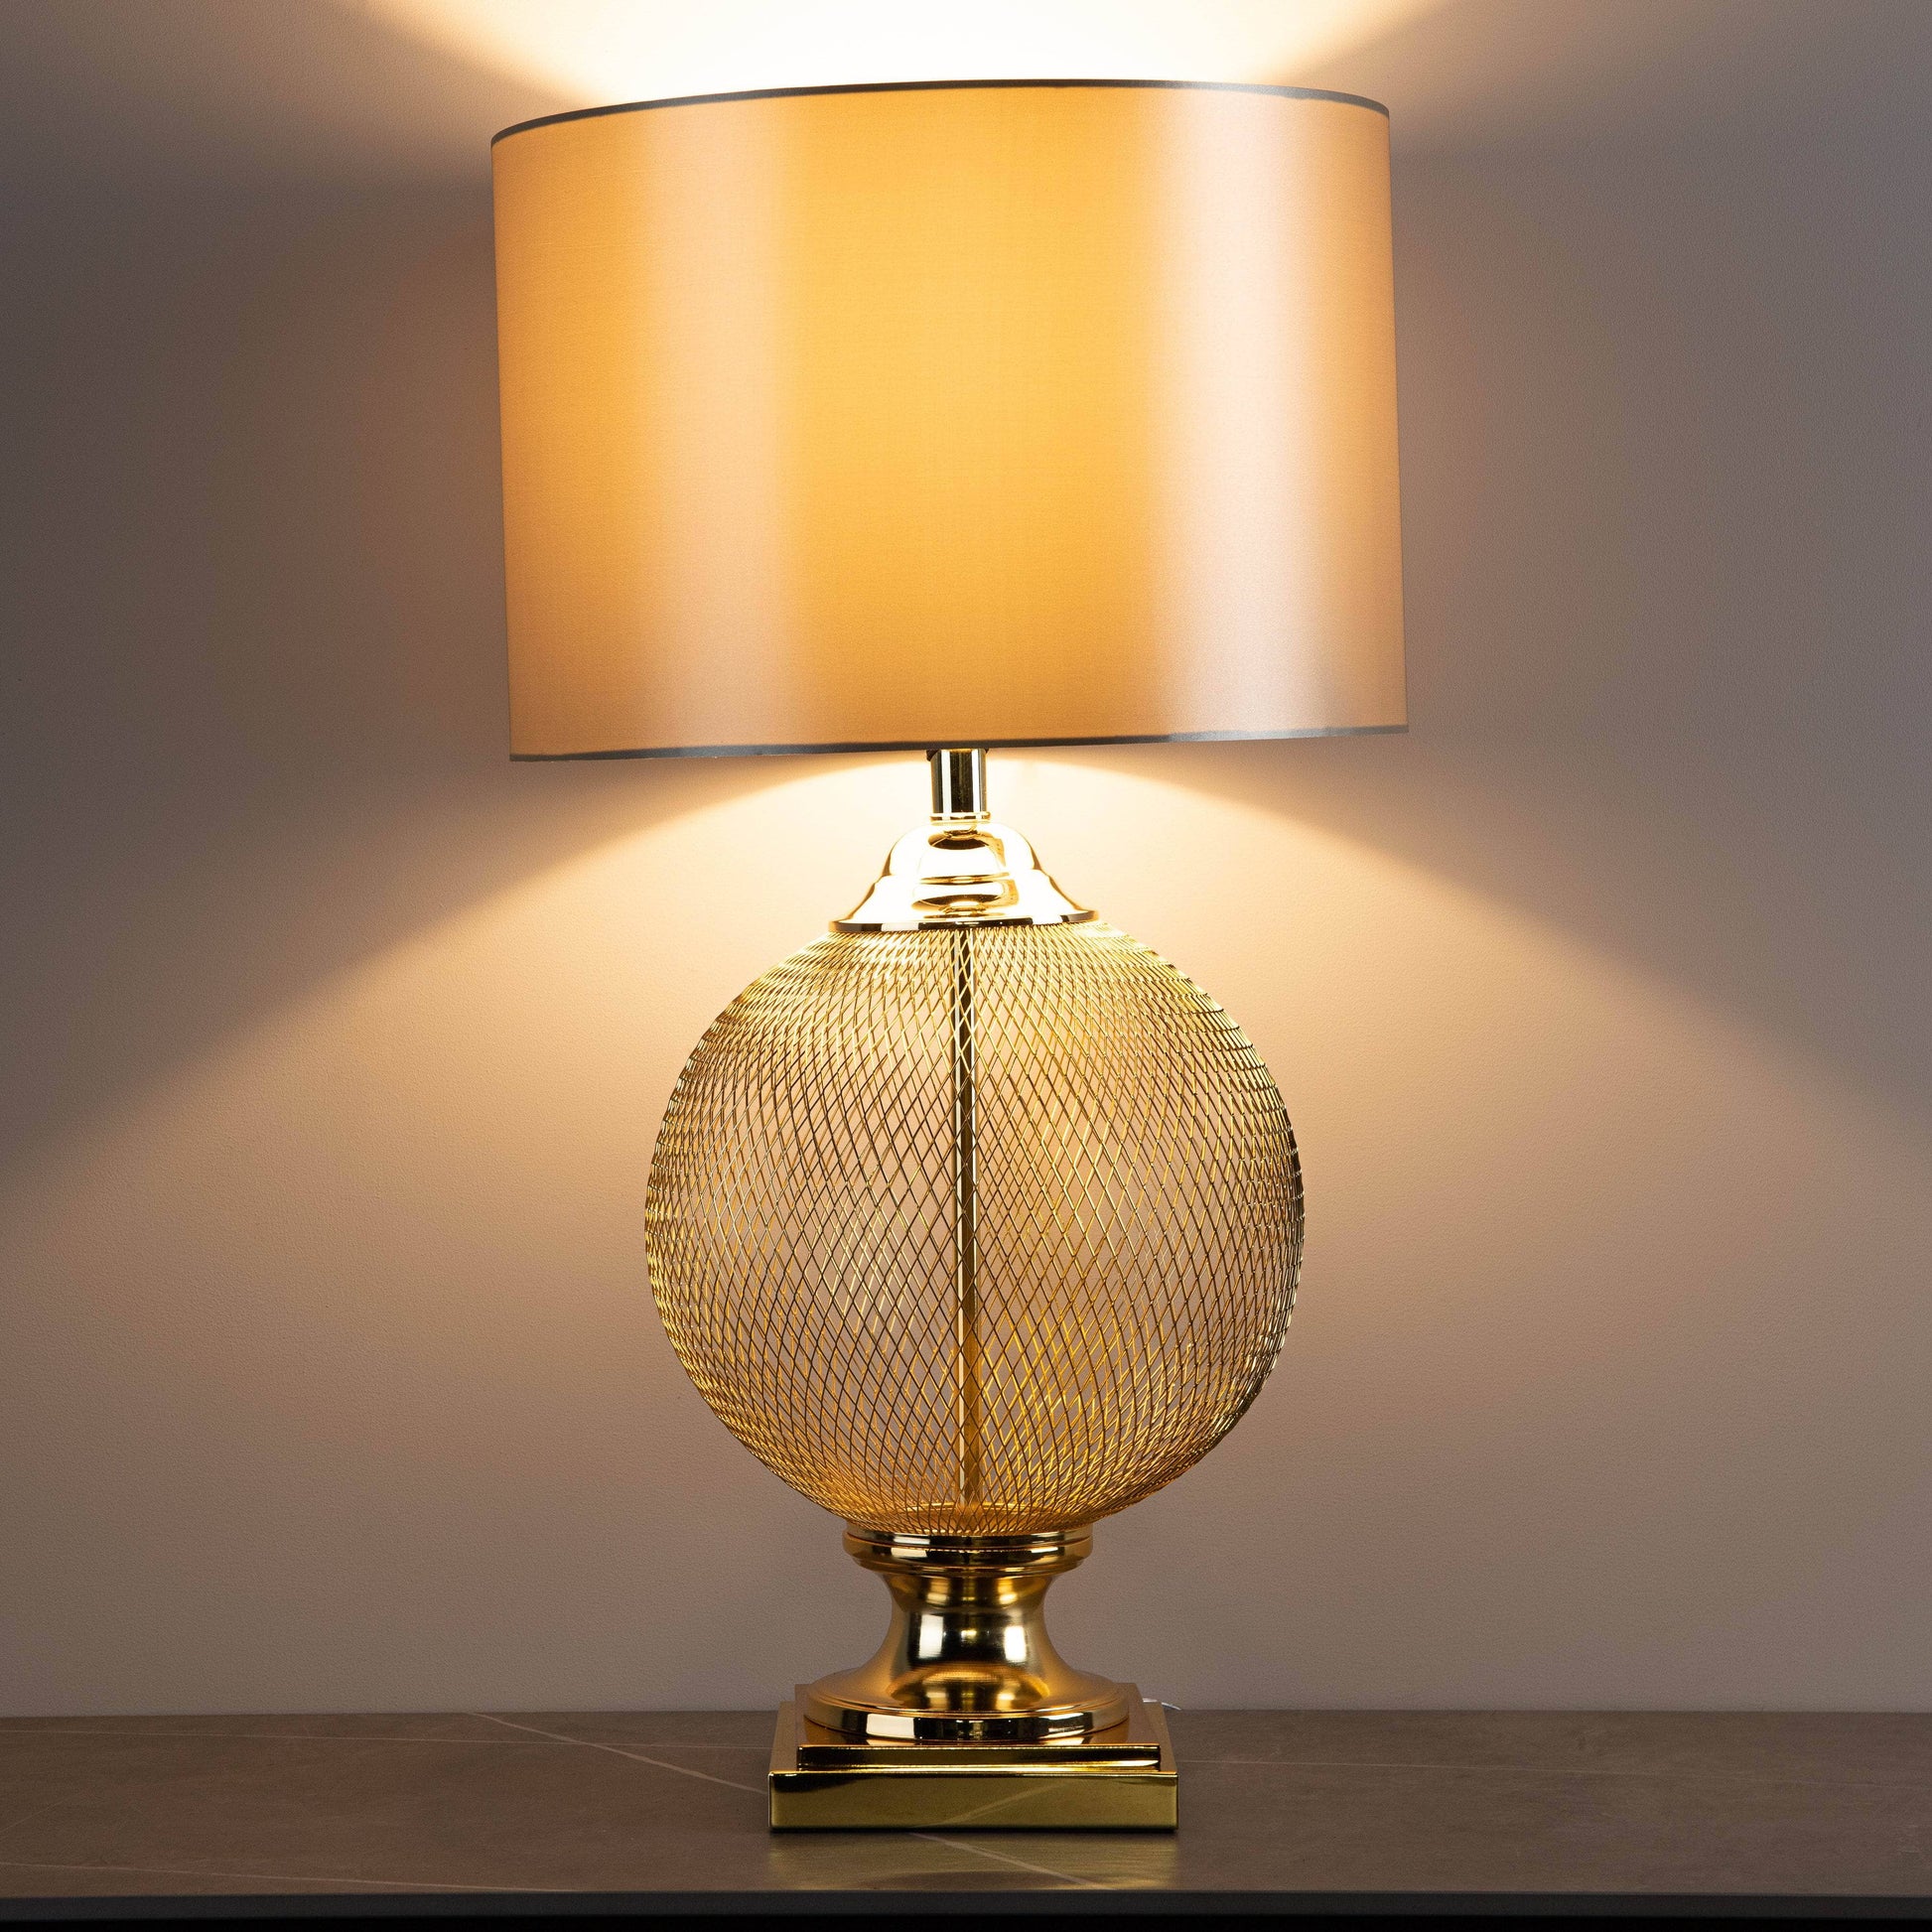 Lights  -  Gold Wire Mesh Table Lamp  -  60004272